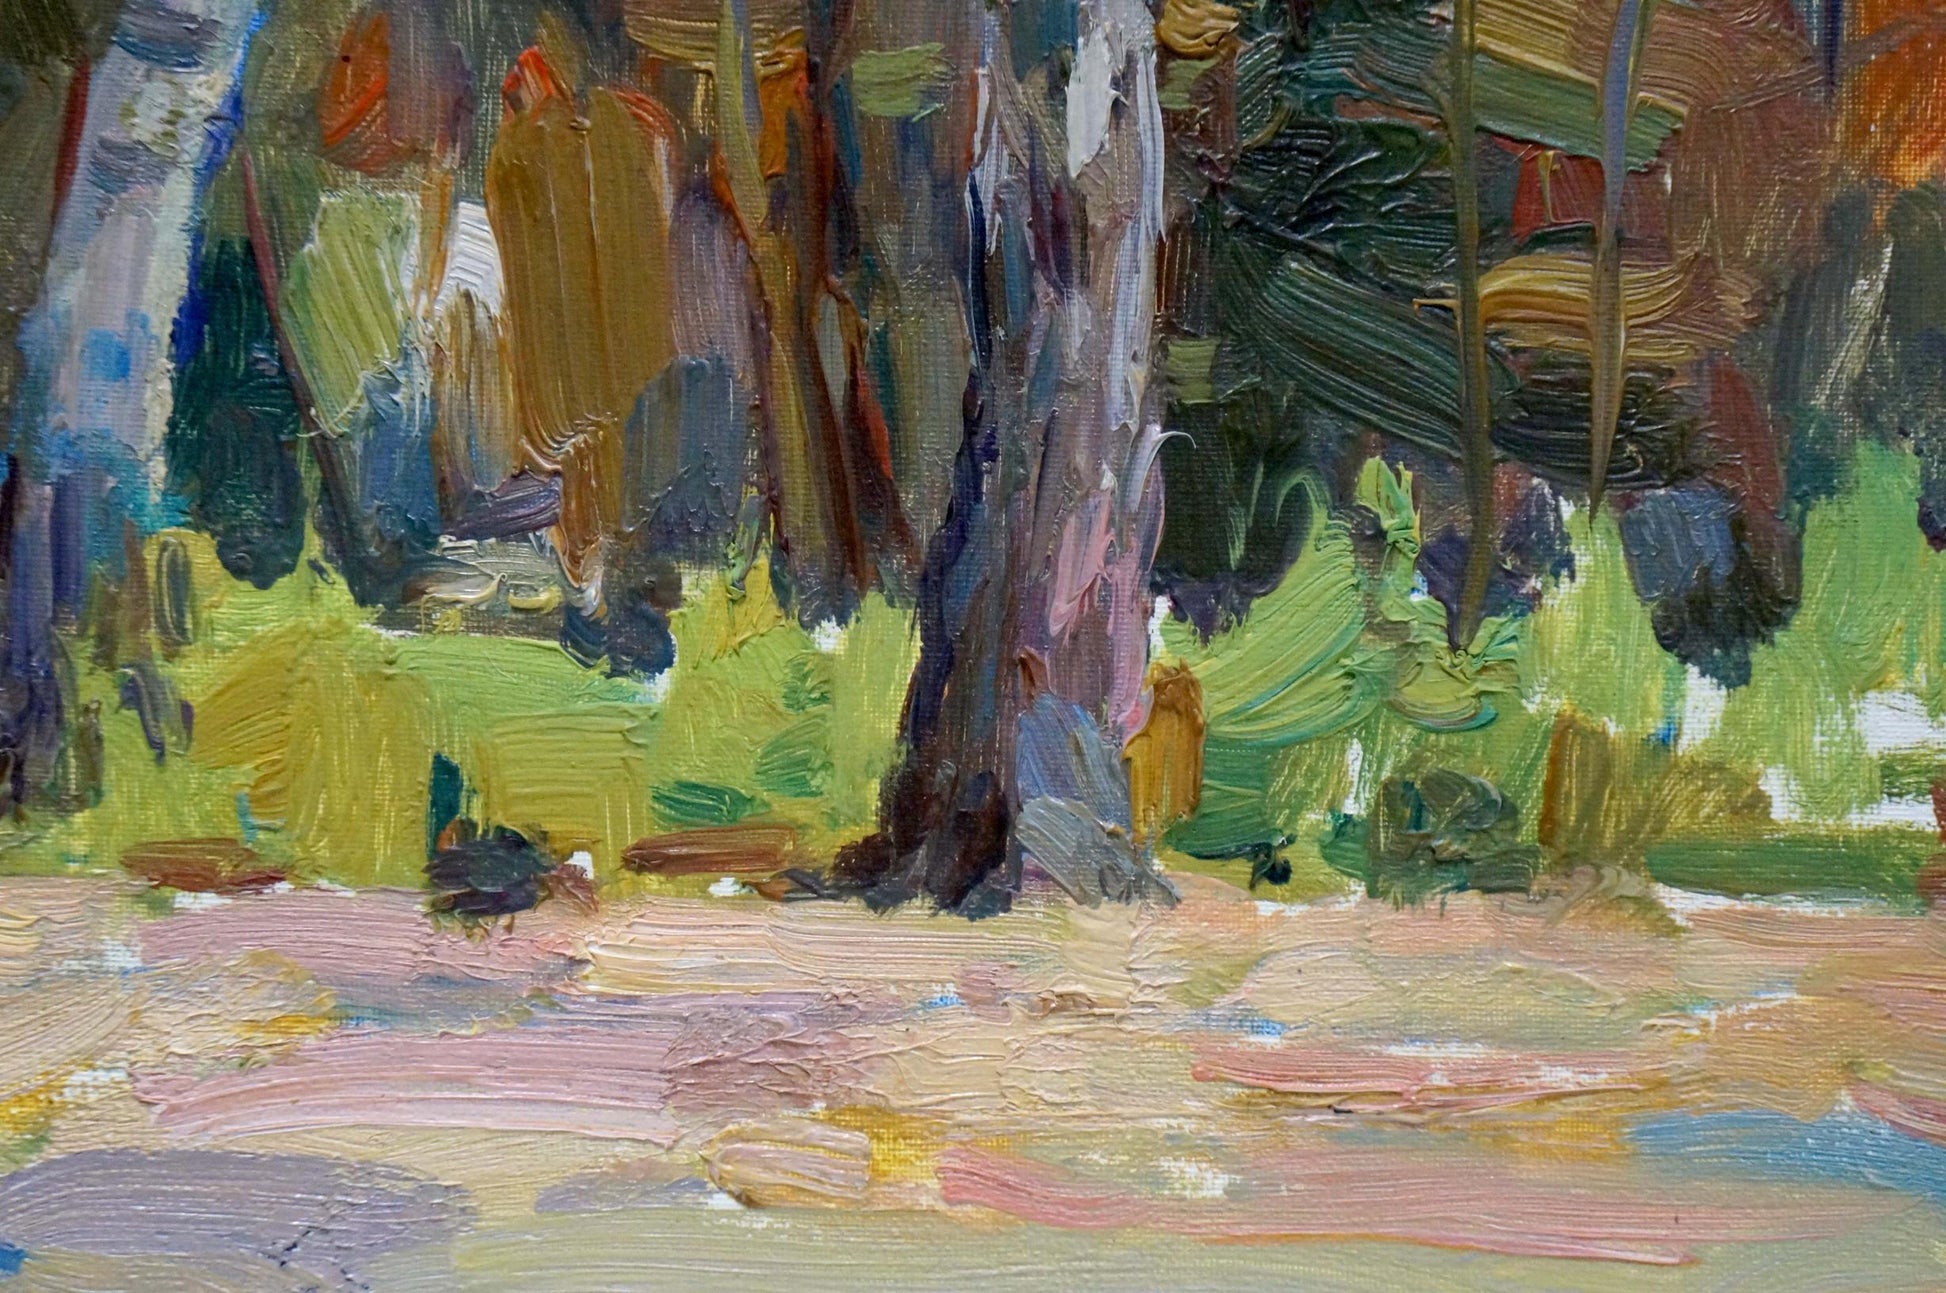 A woodland scene is captured in Mikhail Saulovich Turovsky's oil painting